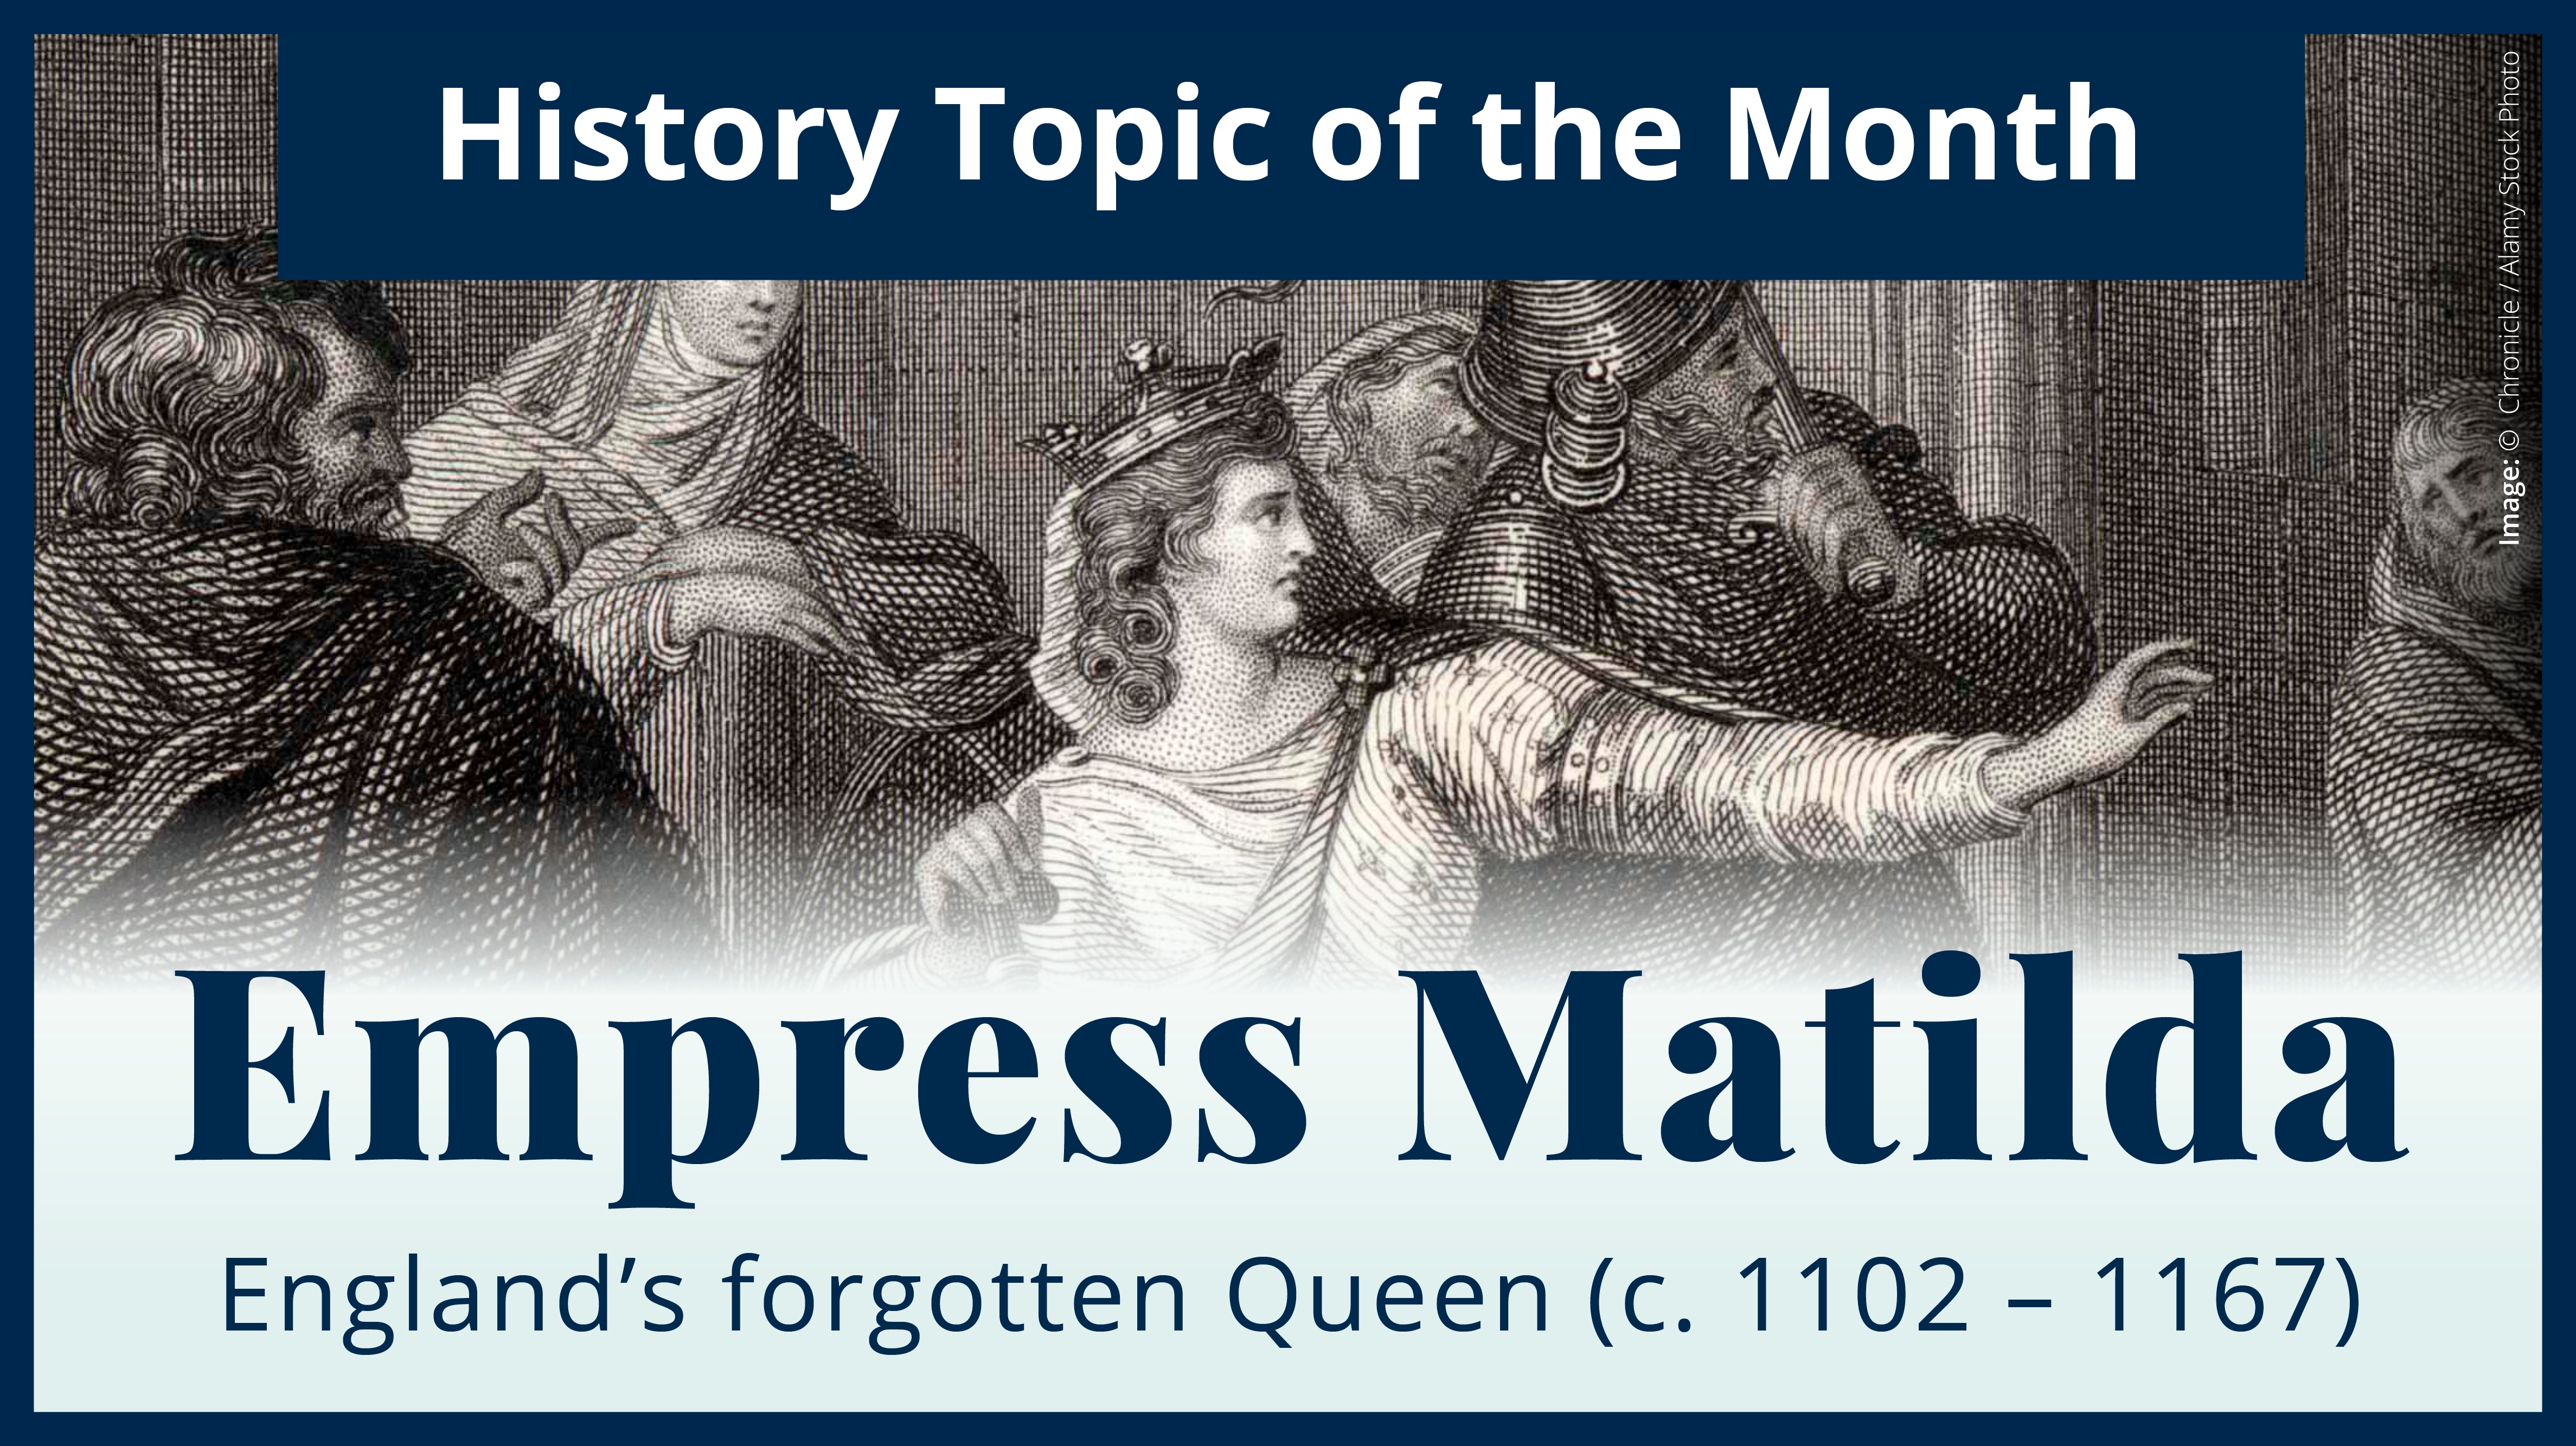 History topic of the month: Empress Matilda